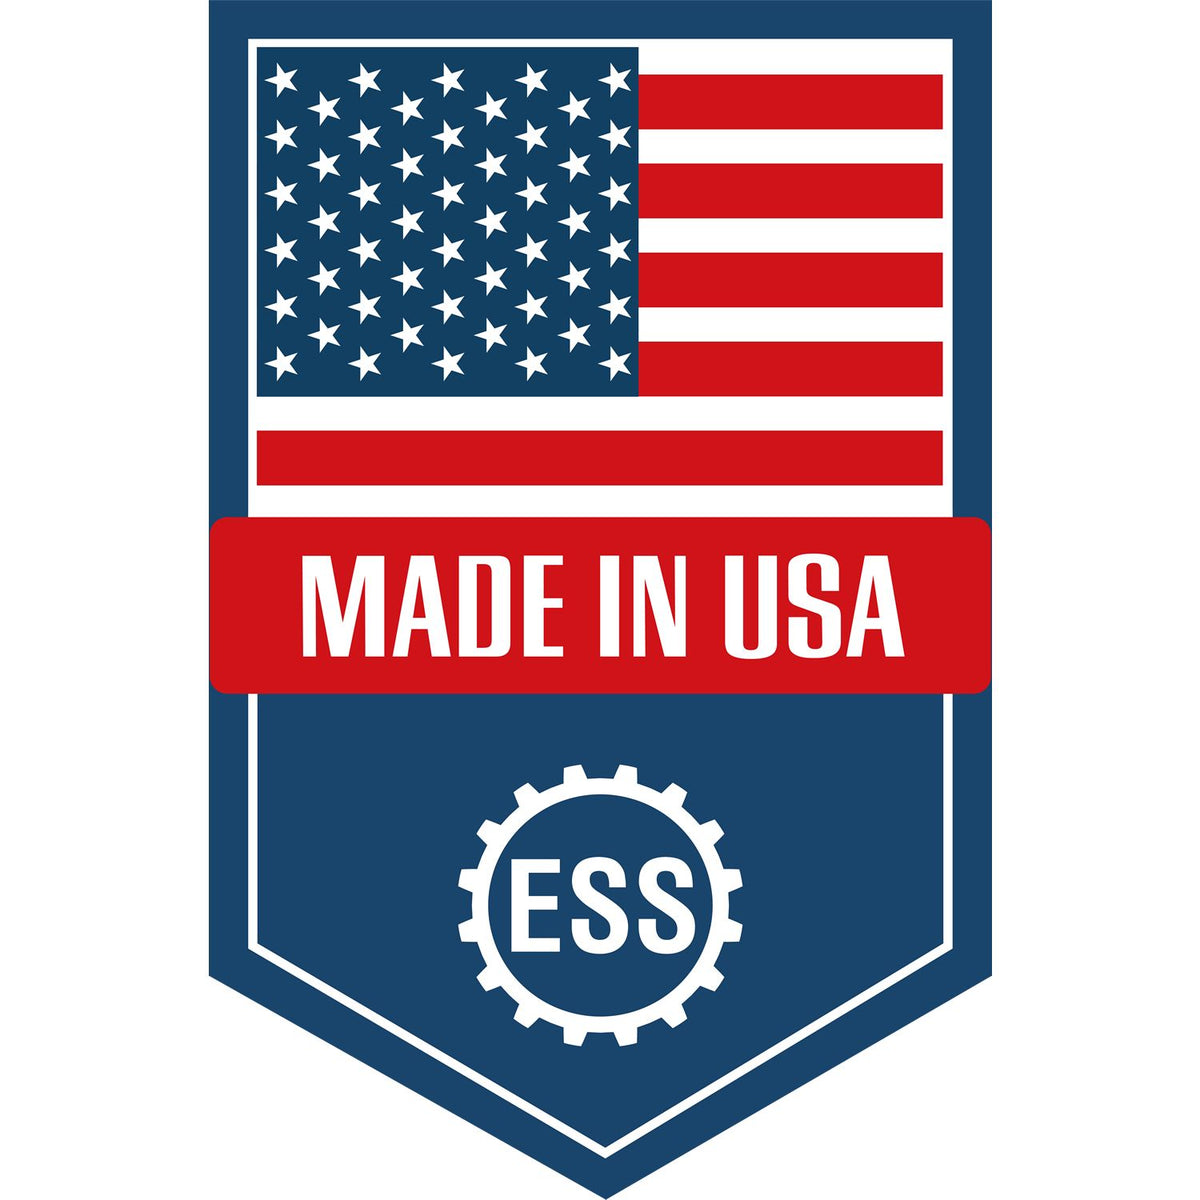 An icon or graphic with an american flag and text reading Made in USA for the Slim Pre-Inked Massachusetts Landscape Architect Seal Stamp